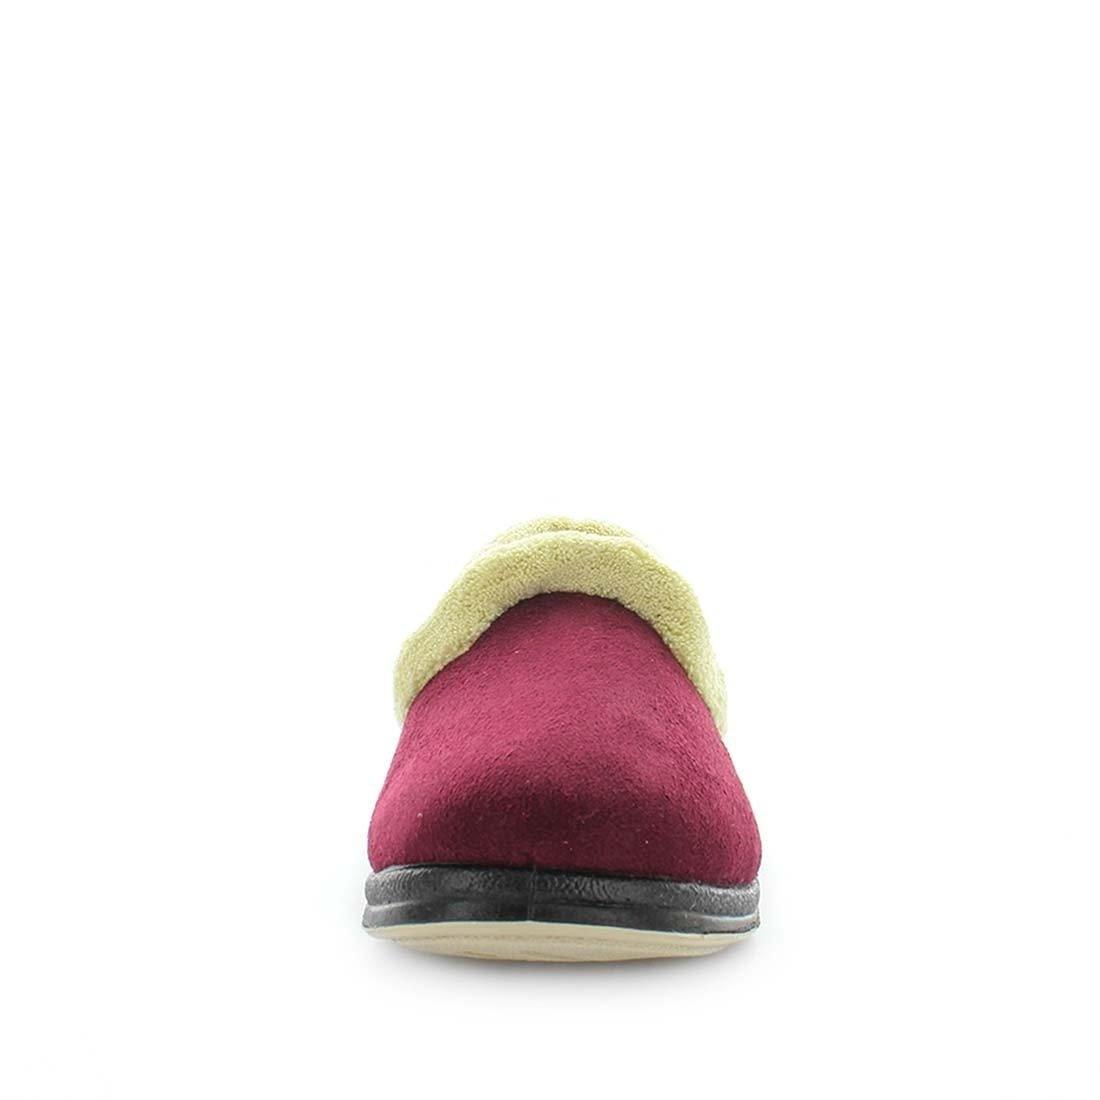 Classic womens slip on slipper, Emille by panda slippers. A burgundy slipper made with soft materials and comfy fit design for the perfect indoor slipper. showing a non slip sole and micro terry trimming,